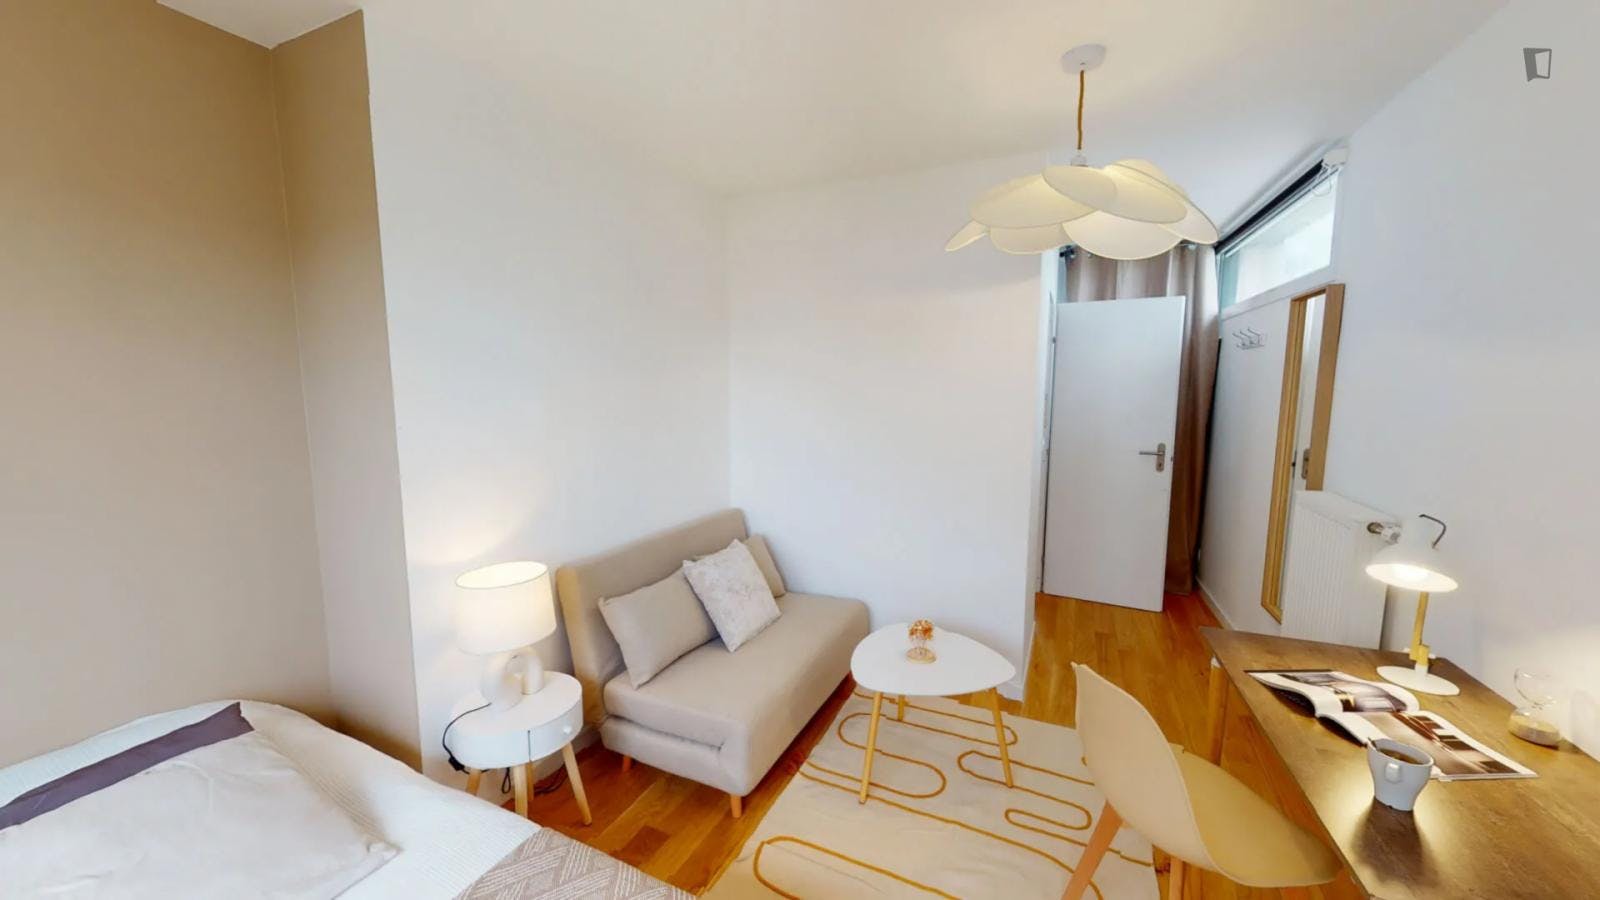 Cosy double bedroom in a 4-bedroom apartment close to Mairie de Saint-Ouen metro station